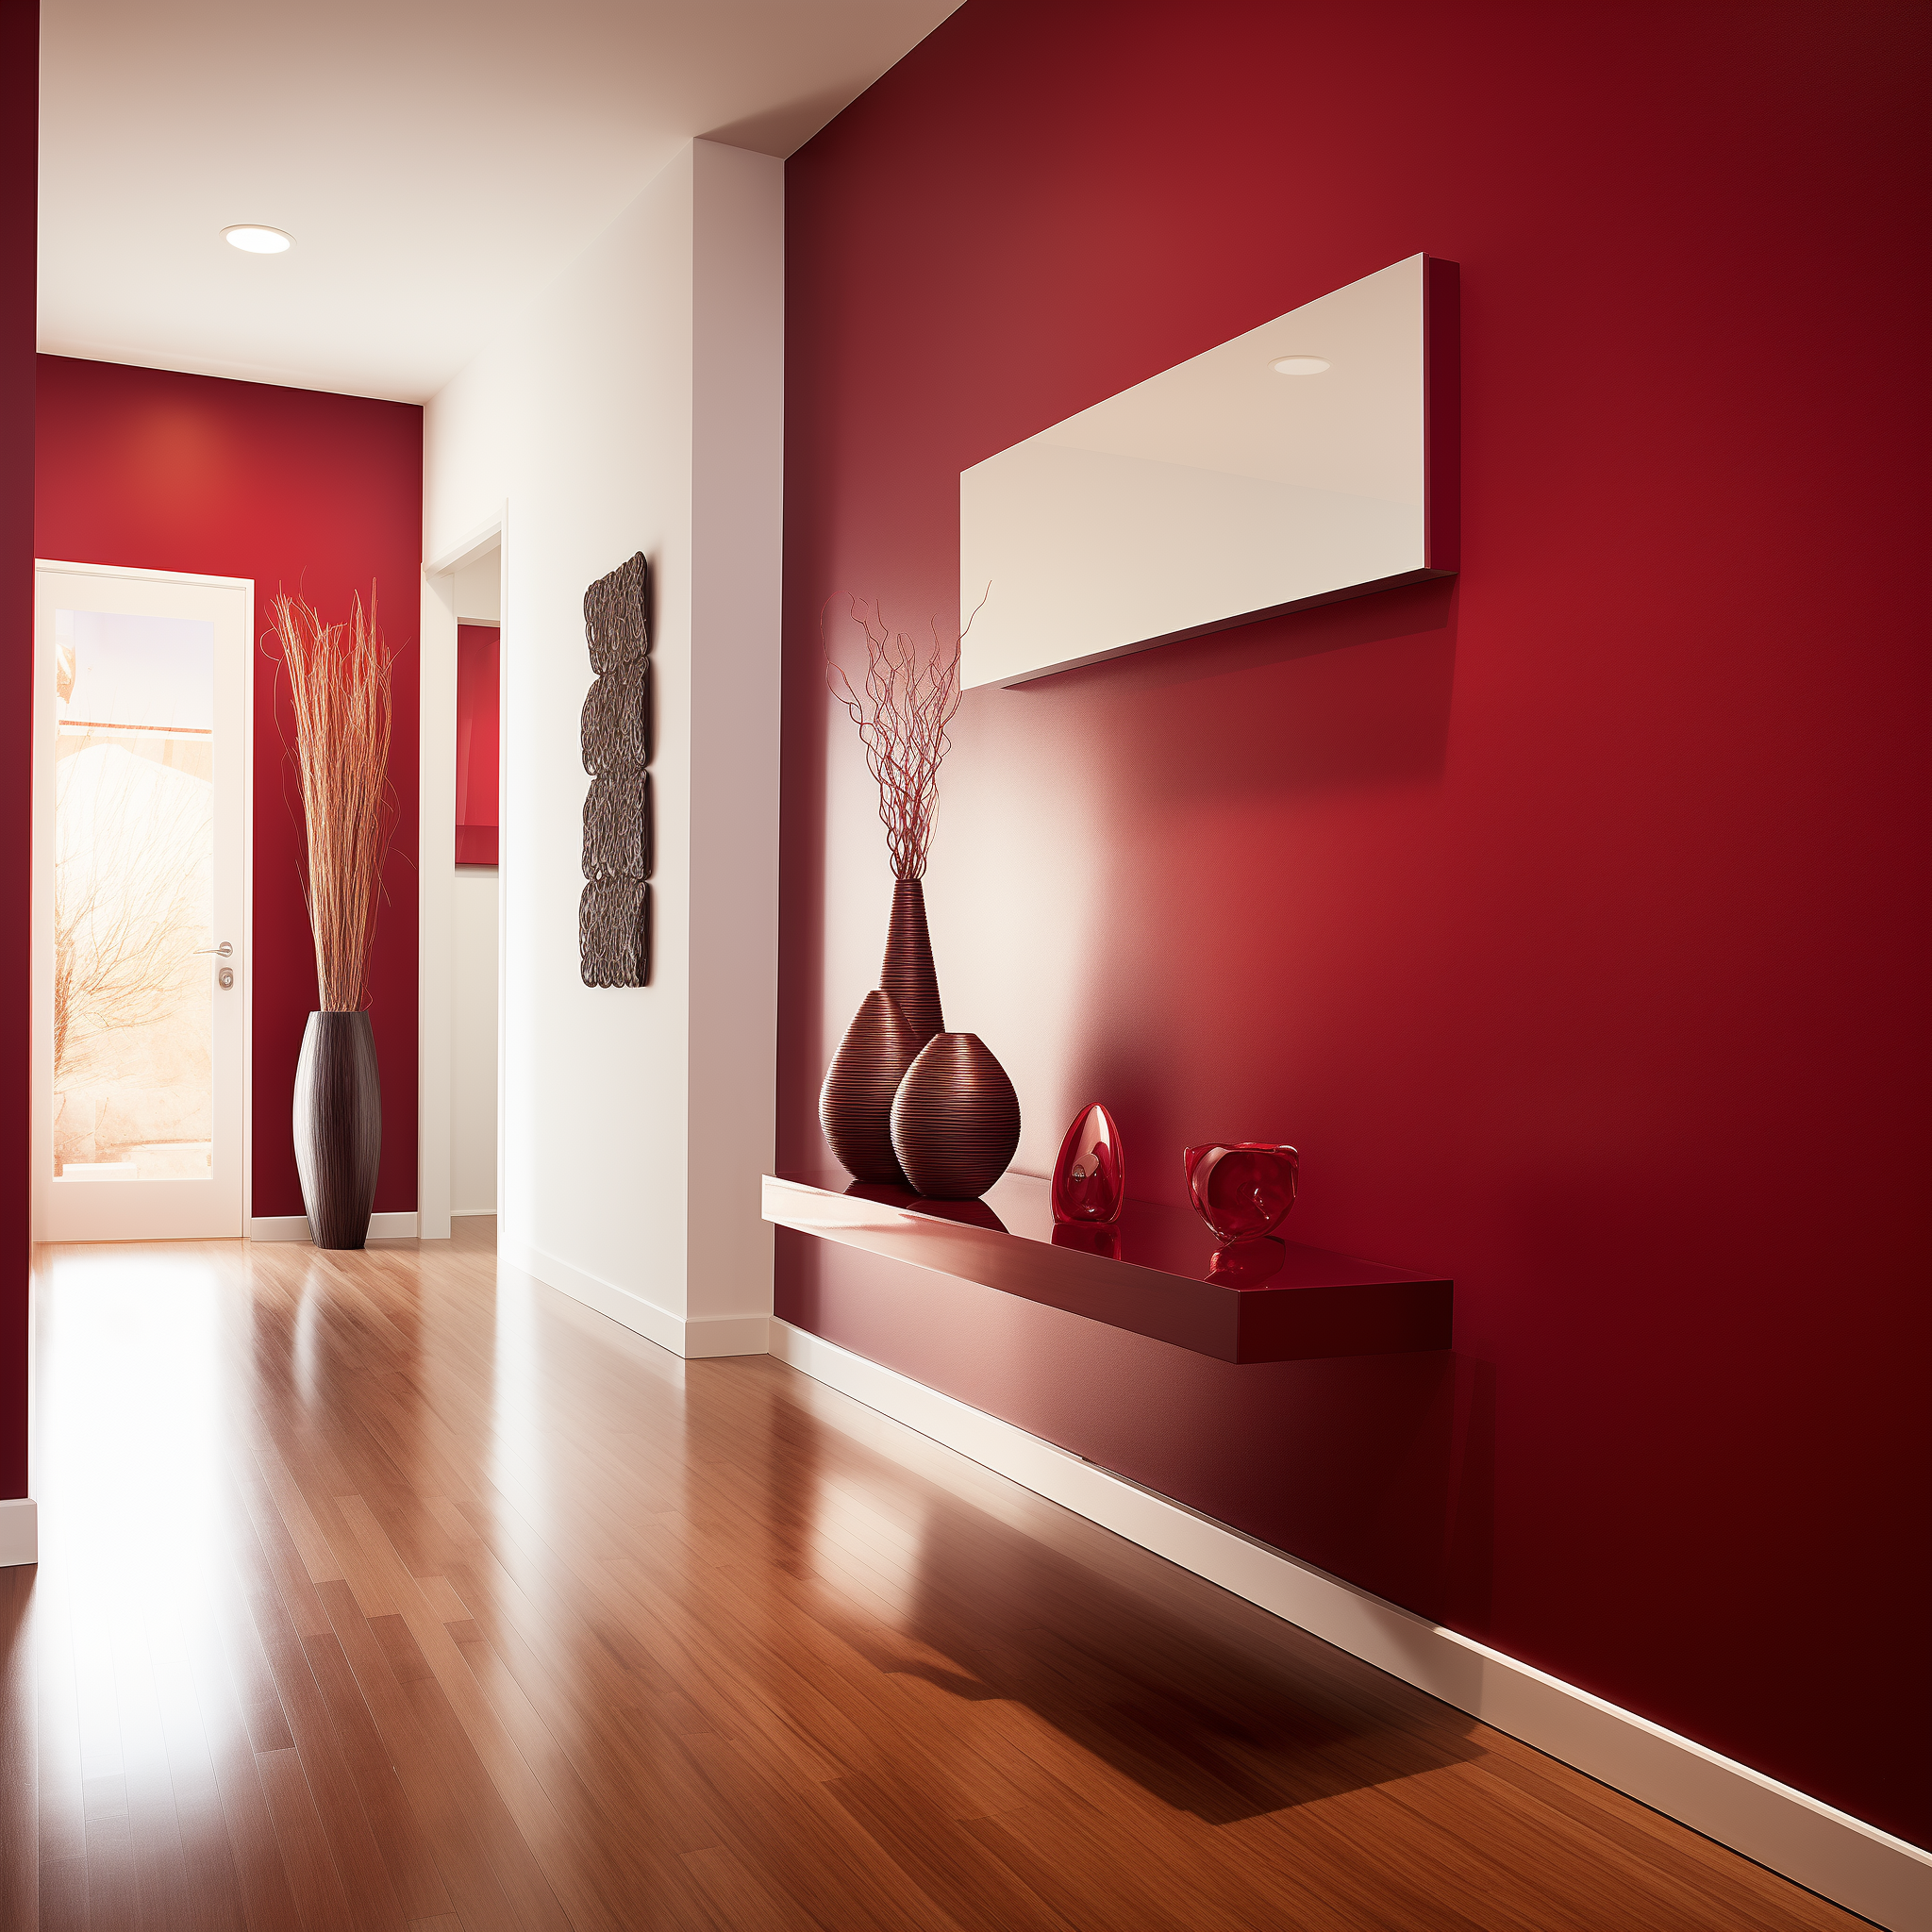 Entrance hallway with red accent wall